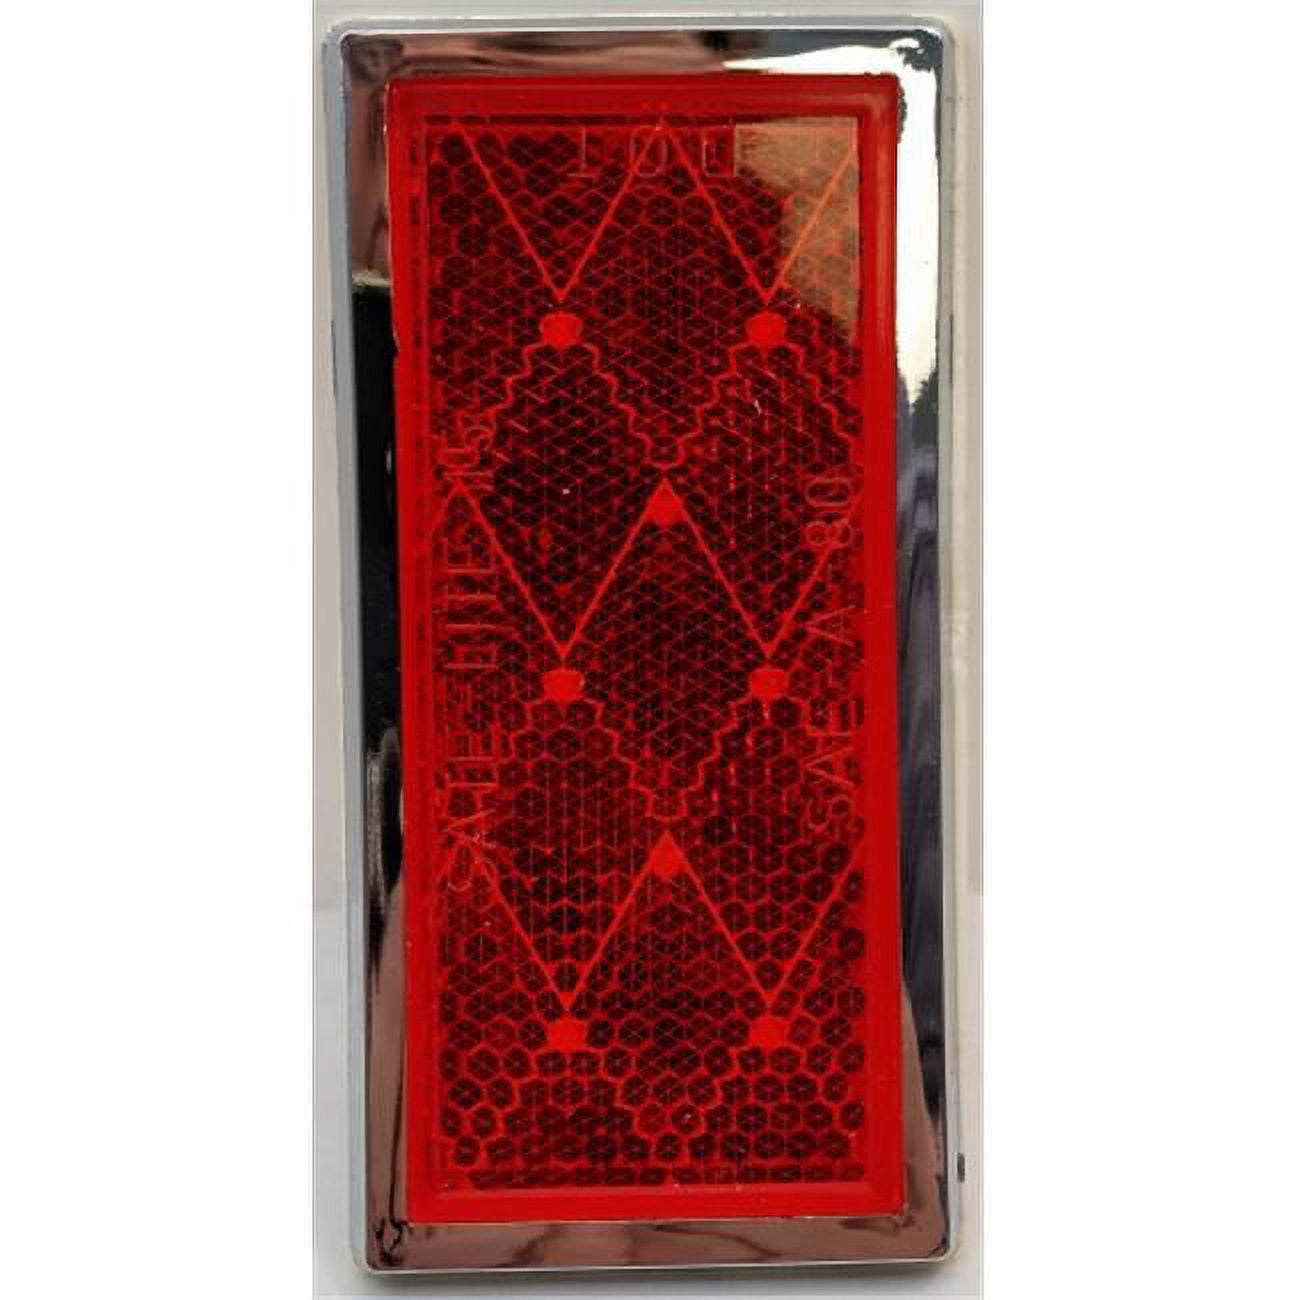 Picture of Barjan 049BP484RX 3 1 by 2 x 1 3 by 4 in. Reflector Rectangular - Red